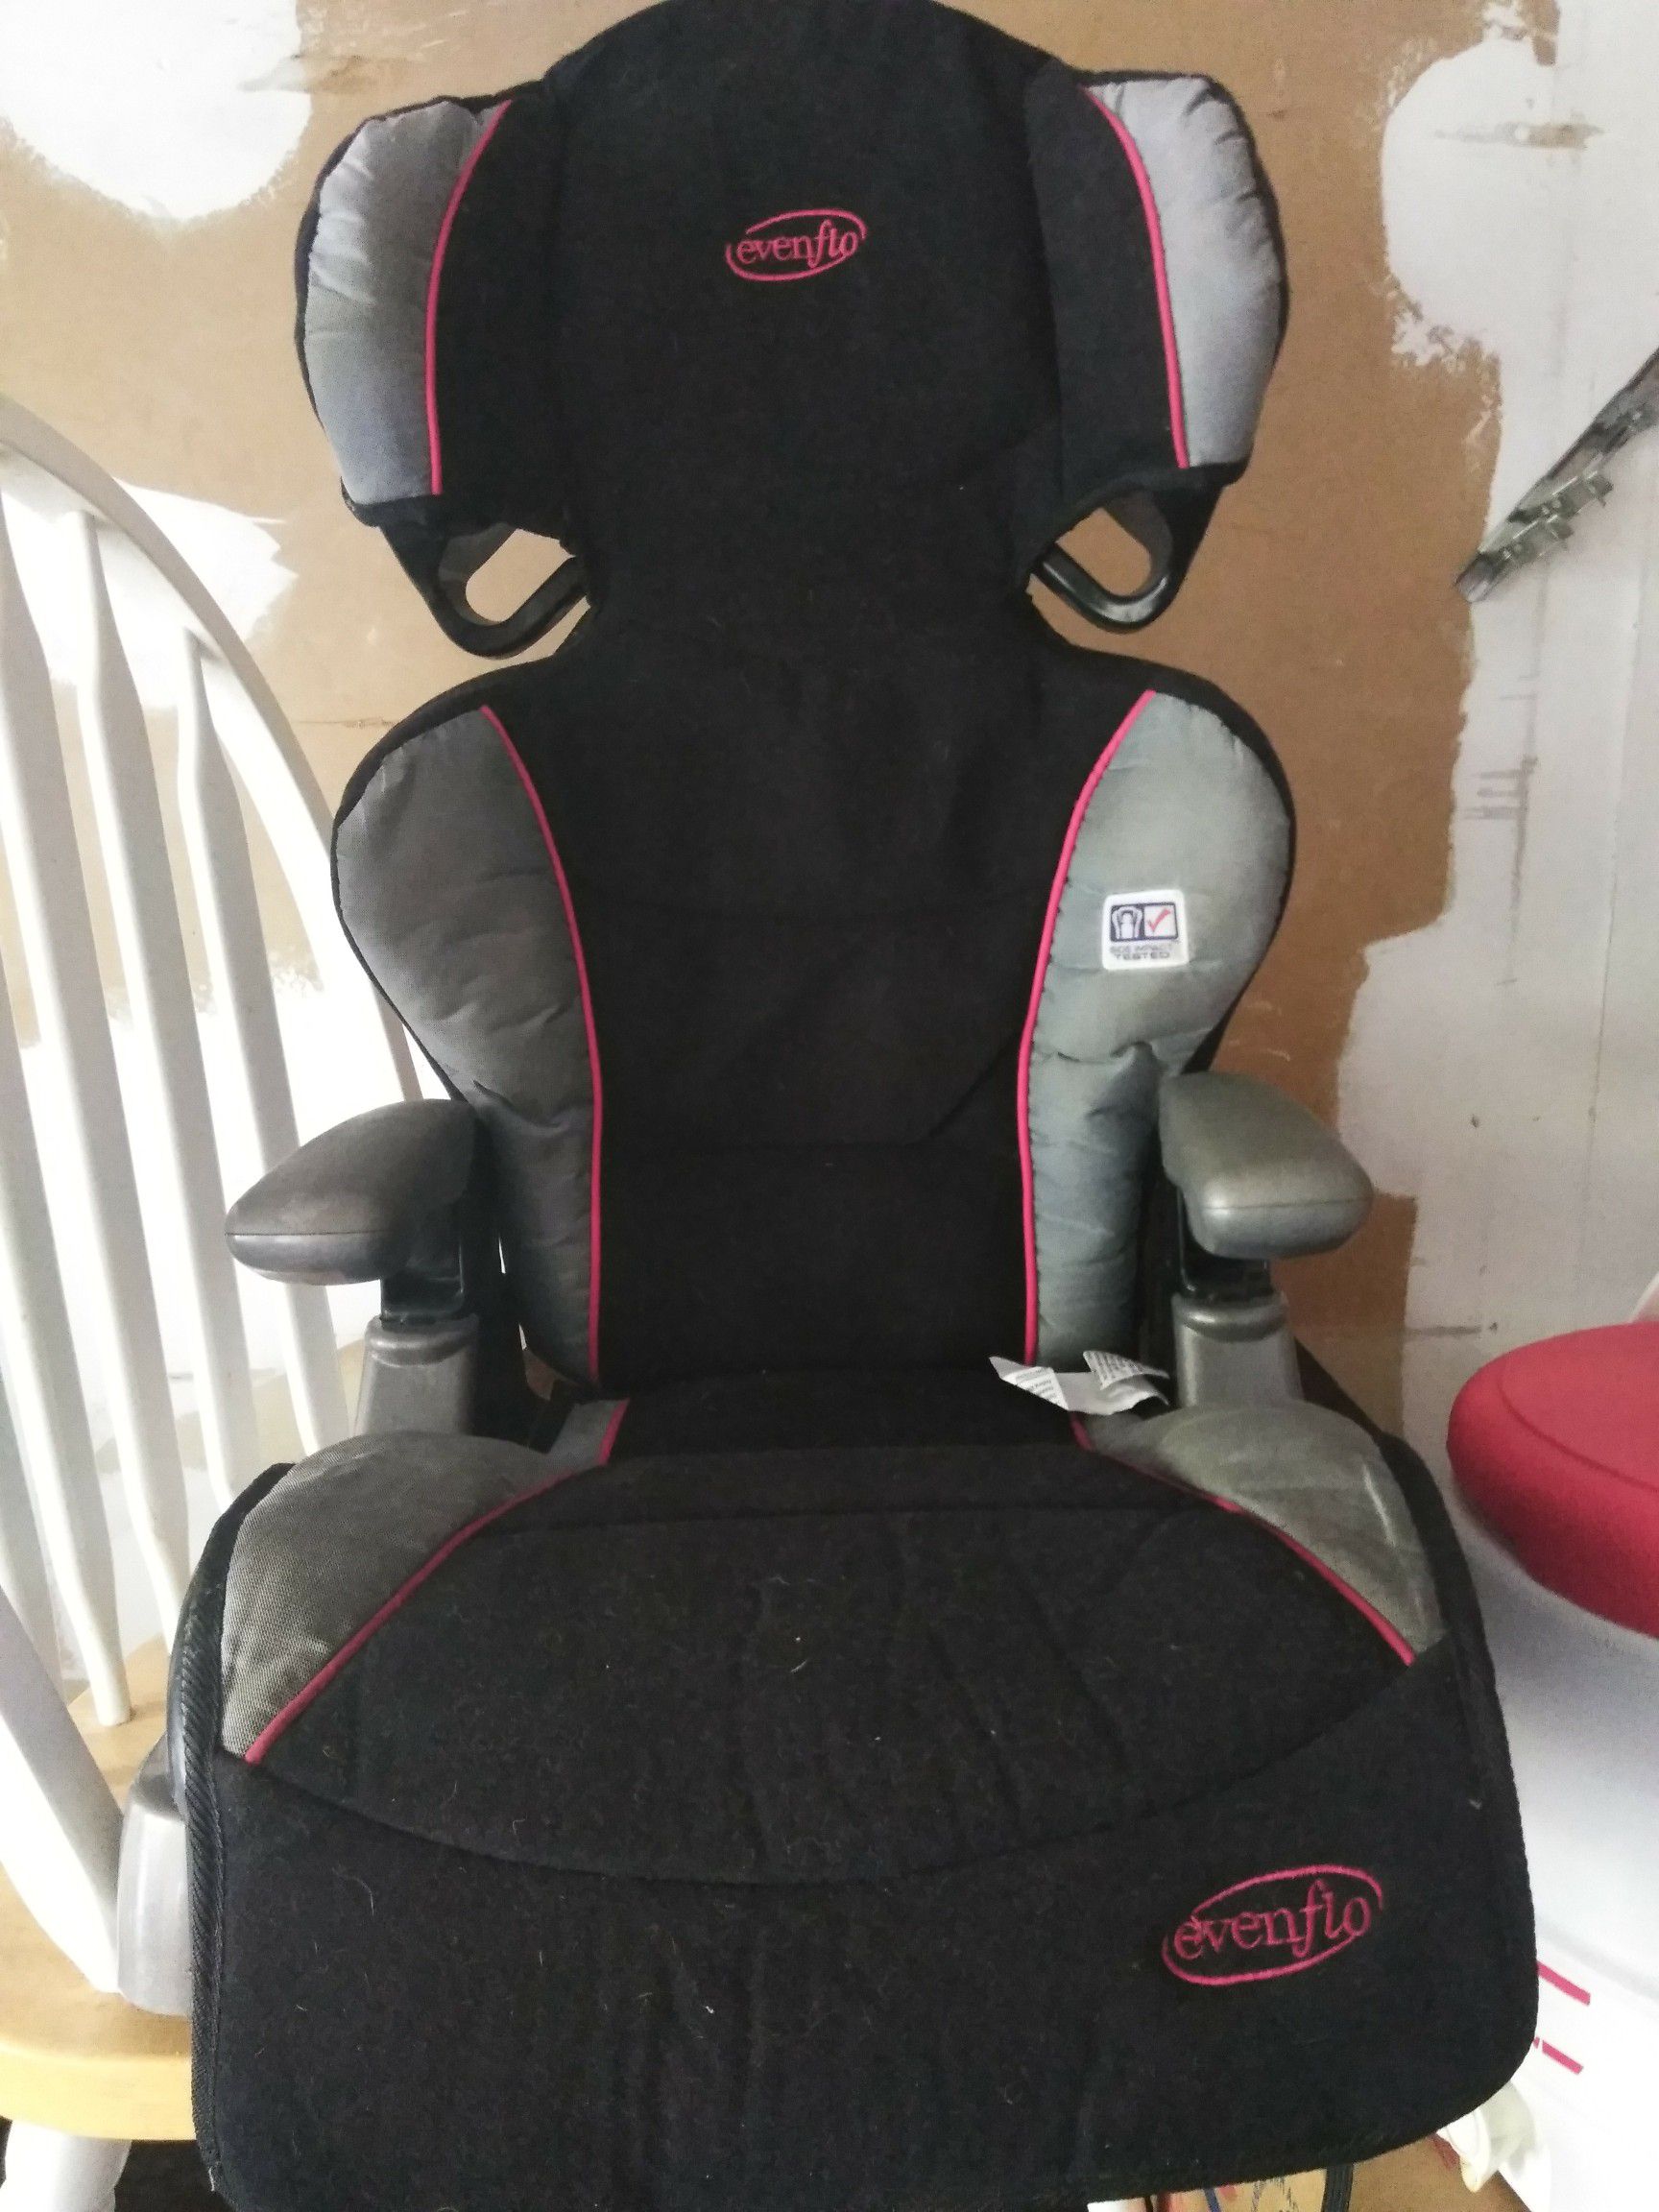 Evenflo  Black, Red & Grey Booster Seat